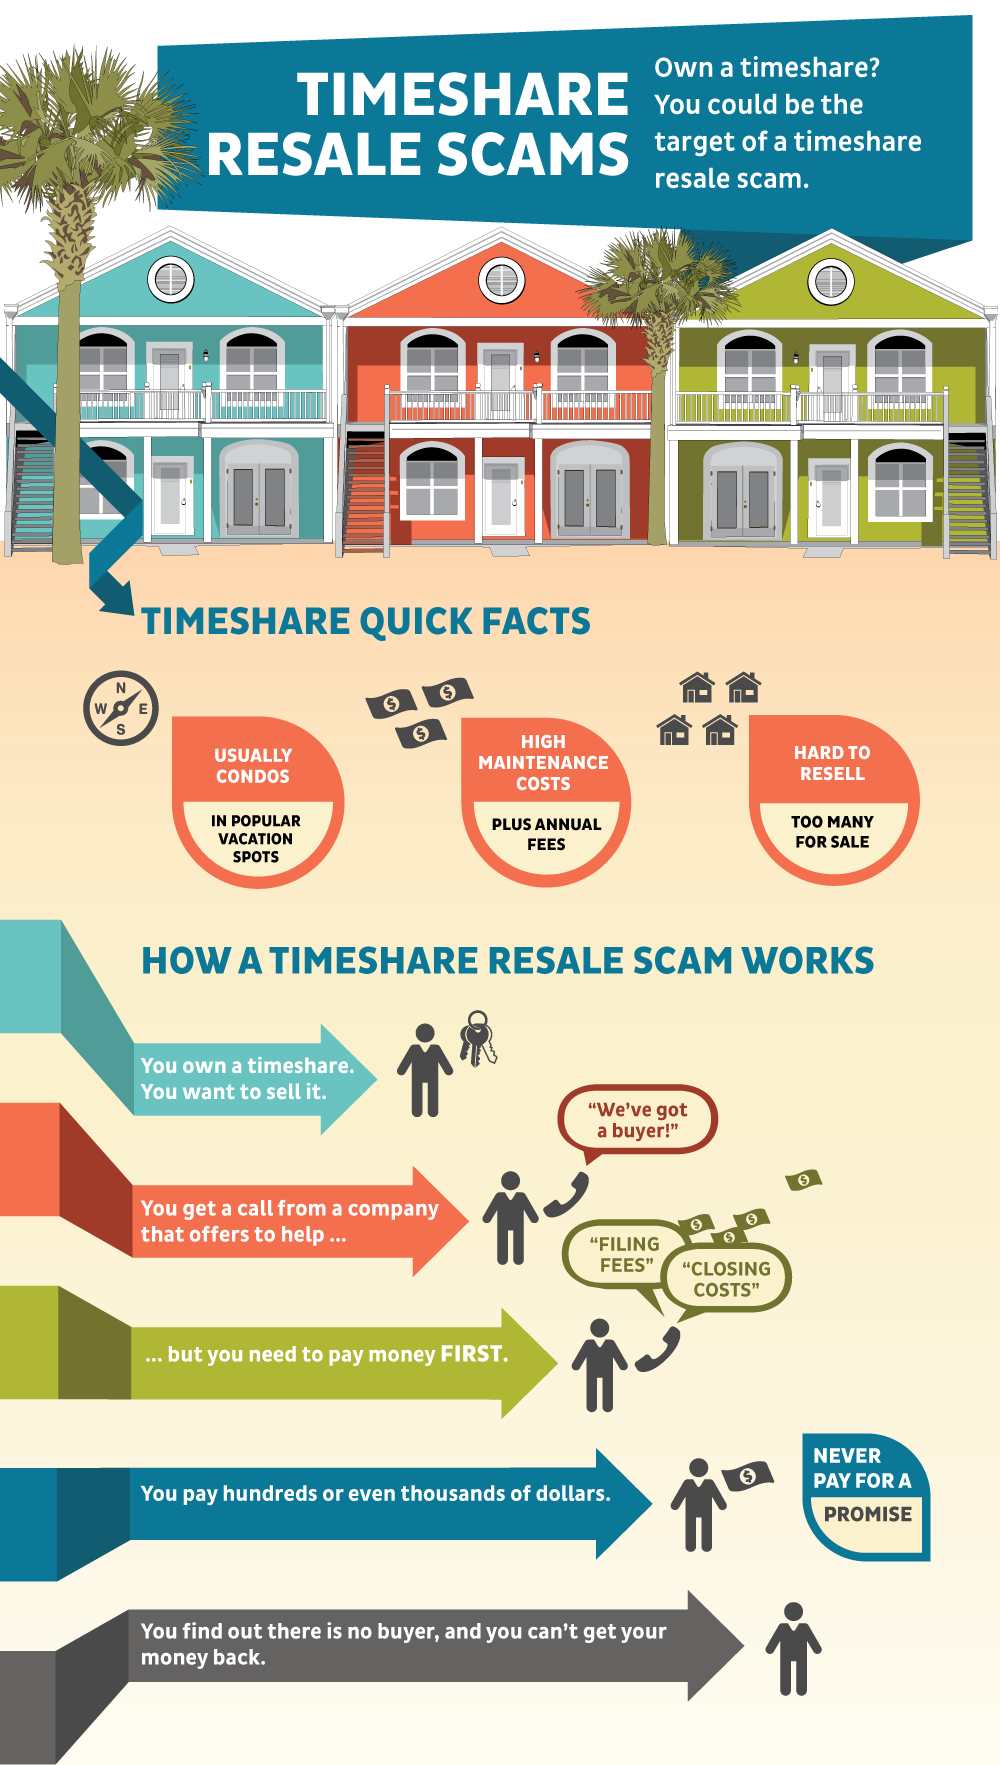 timeshare-resale-scams-infographic